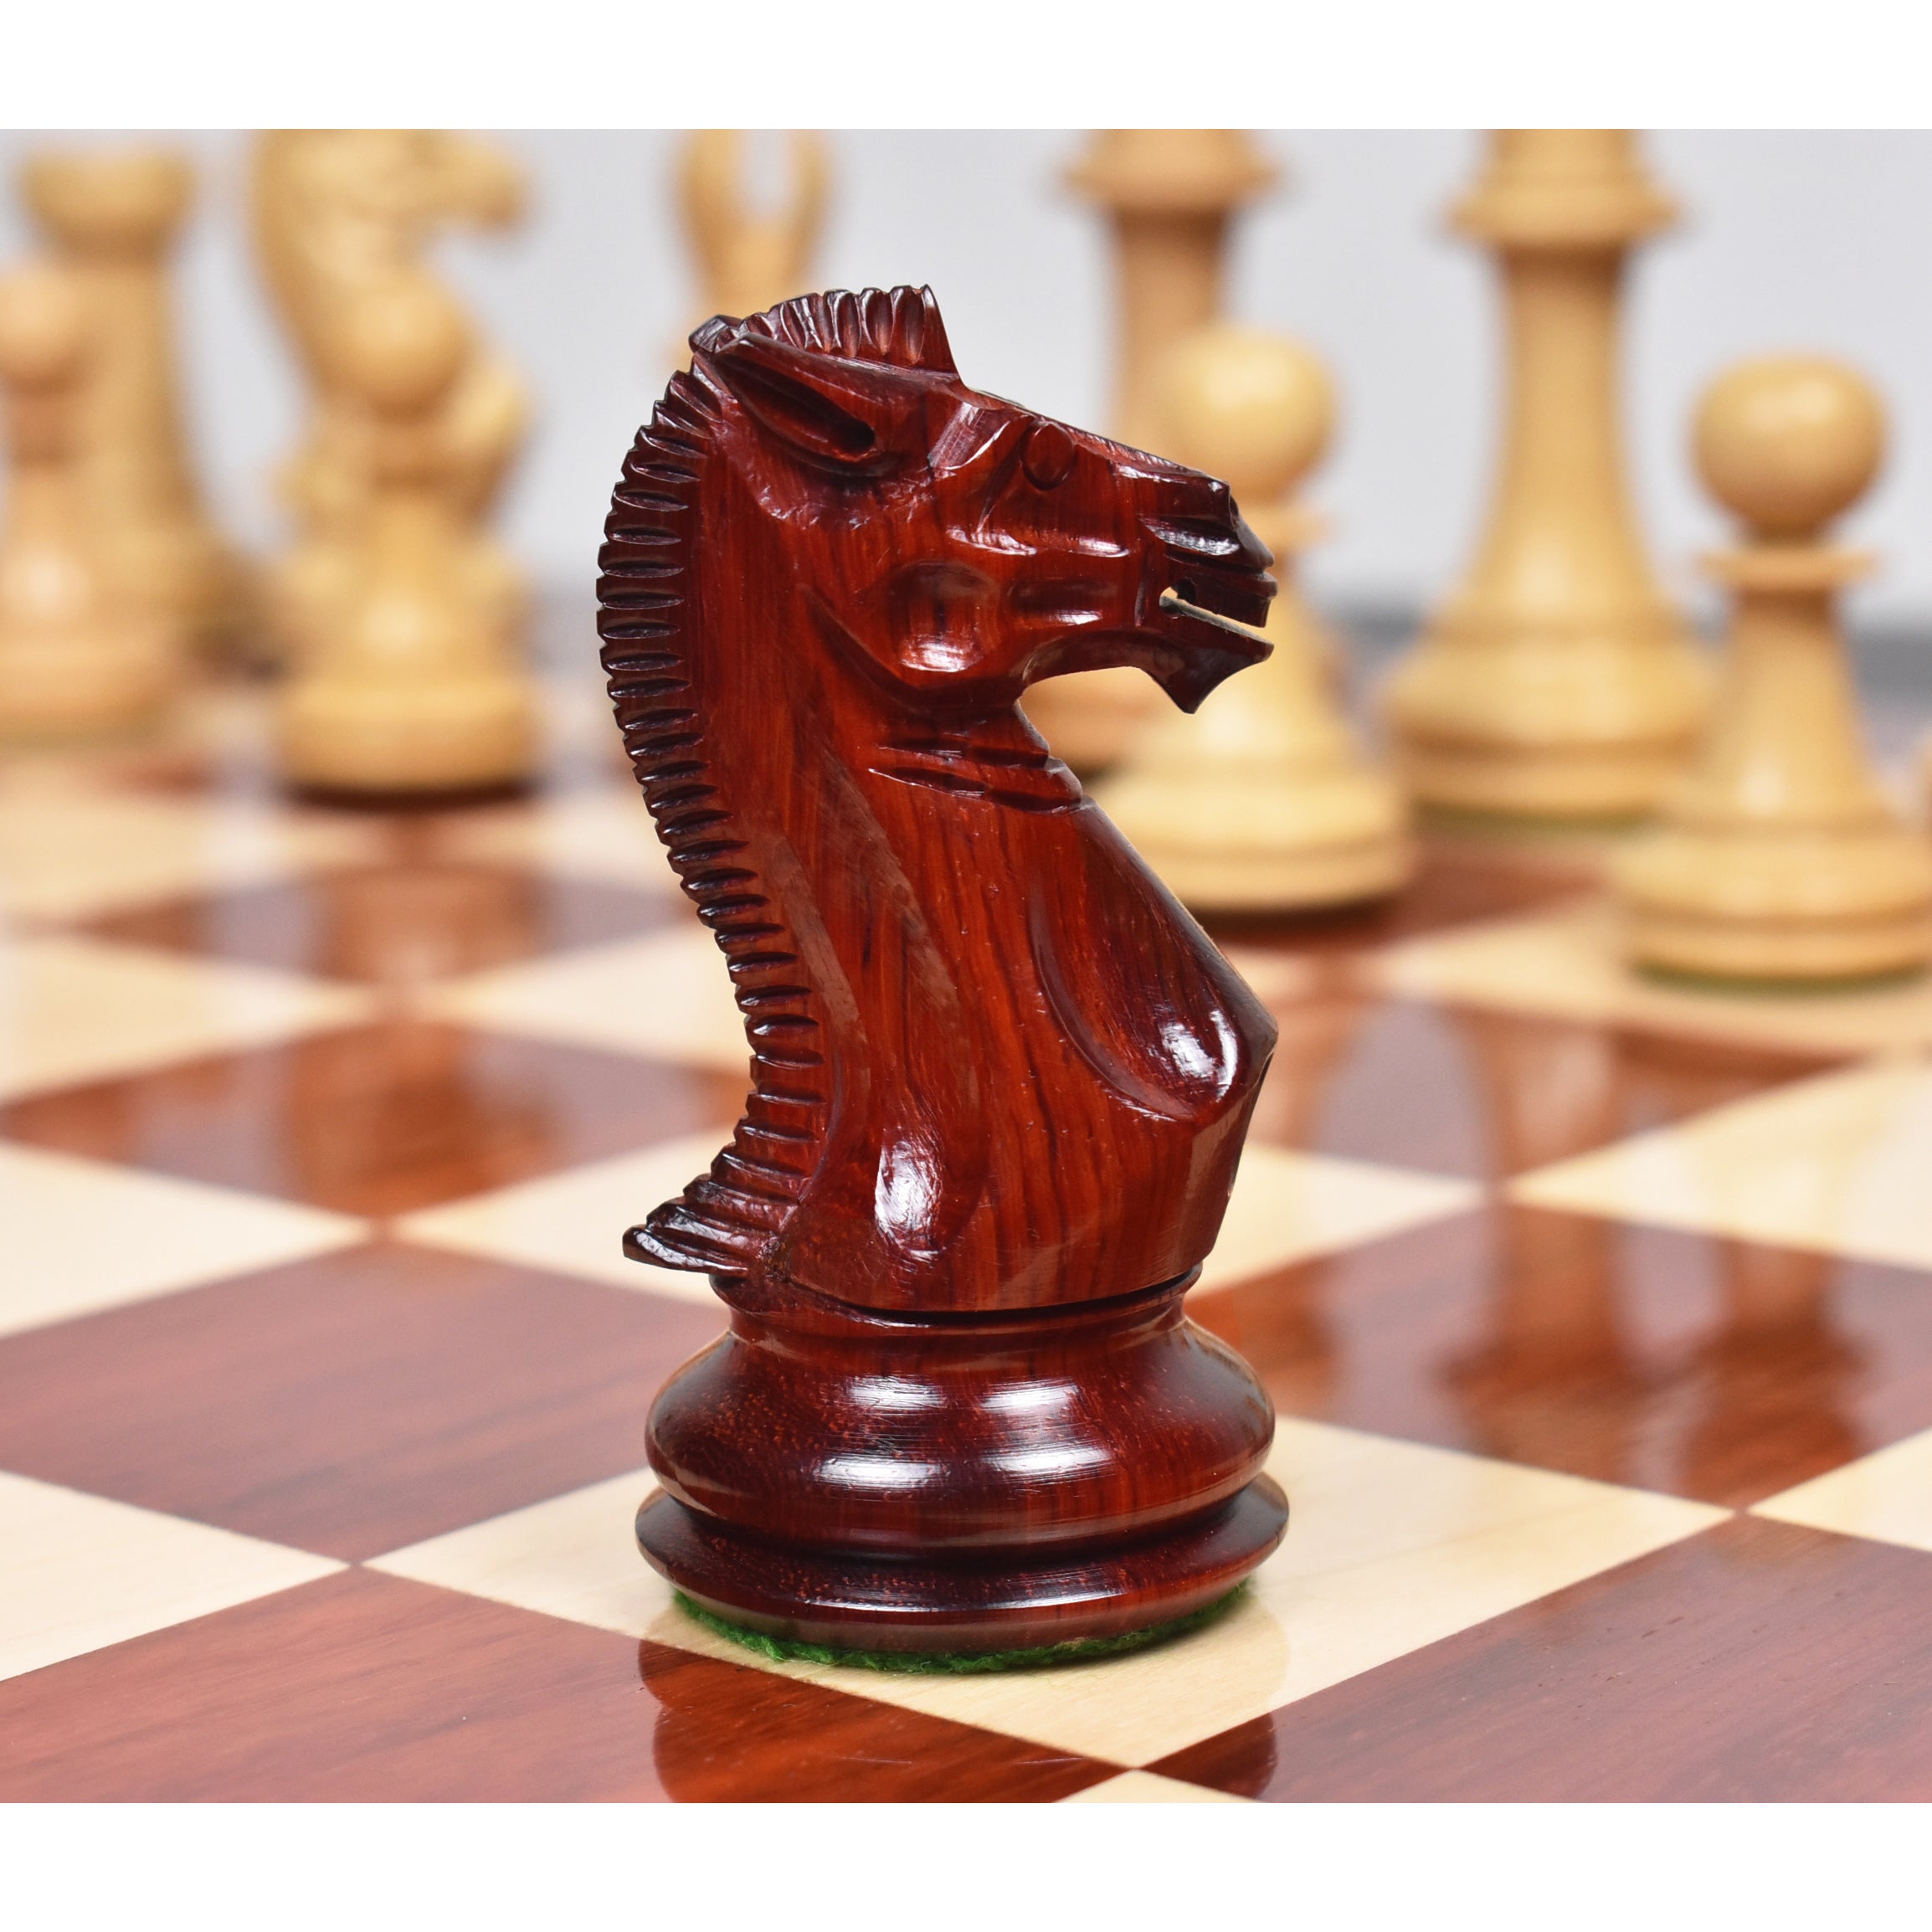 Slightly Imperfect 4.1″ Traveller Staunton Luxury Chess Pieces Only set – Bud Rose Wood & Boxwood